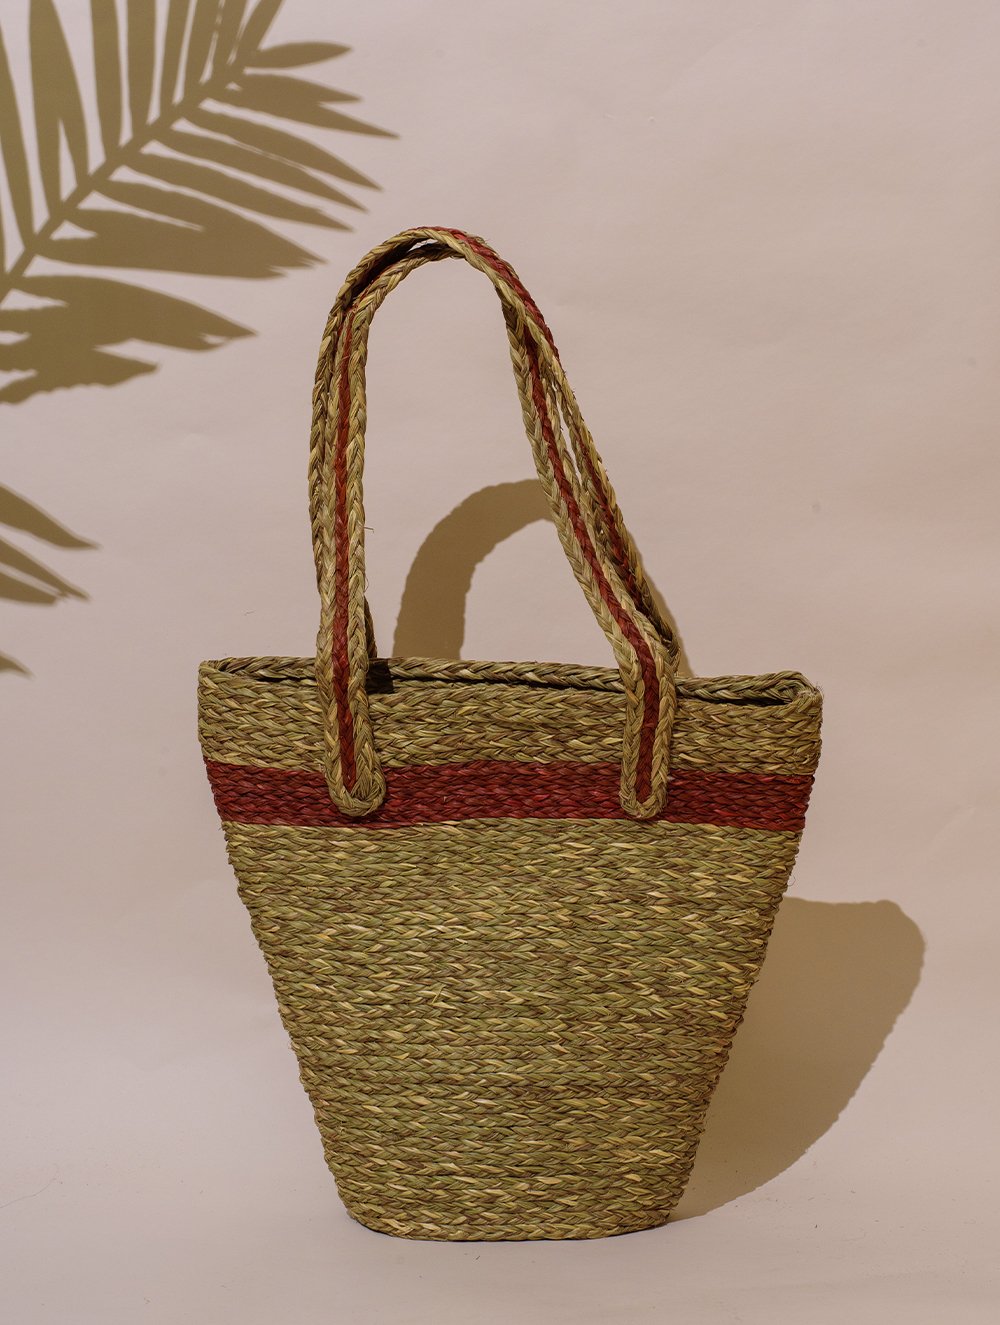 Load image into Gallery viewer, Handcrafted Sabai Grass Tote / Utility Bag - Coral Pink &amp; Beige